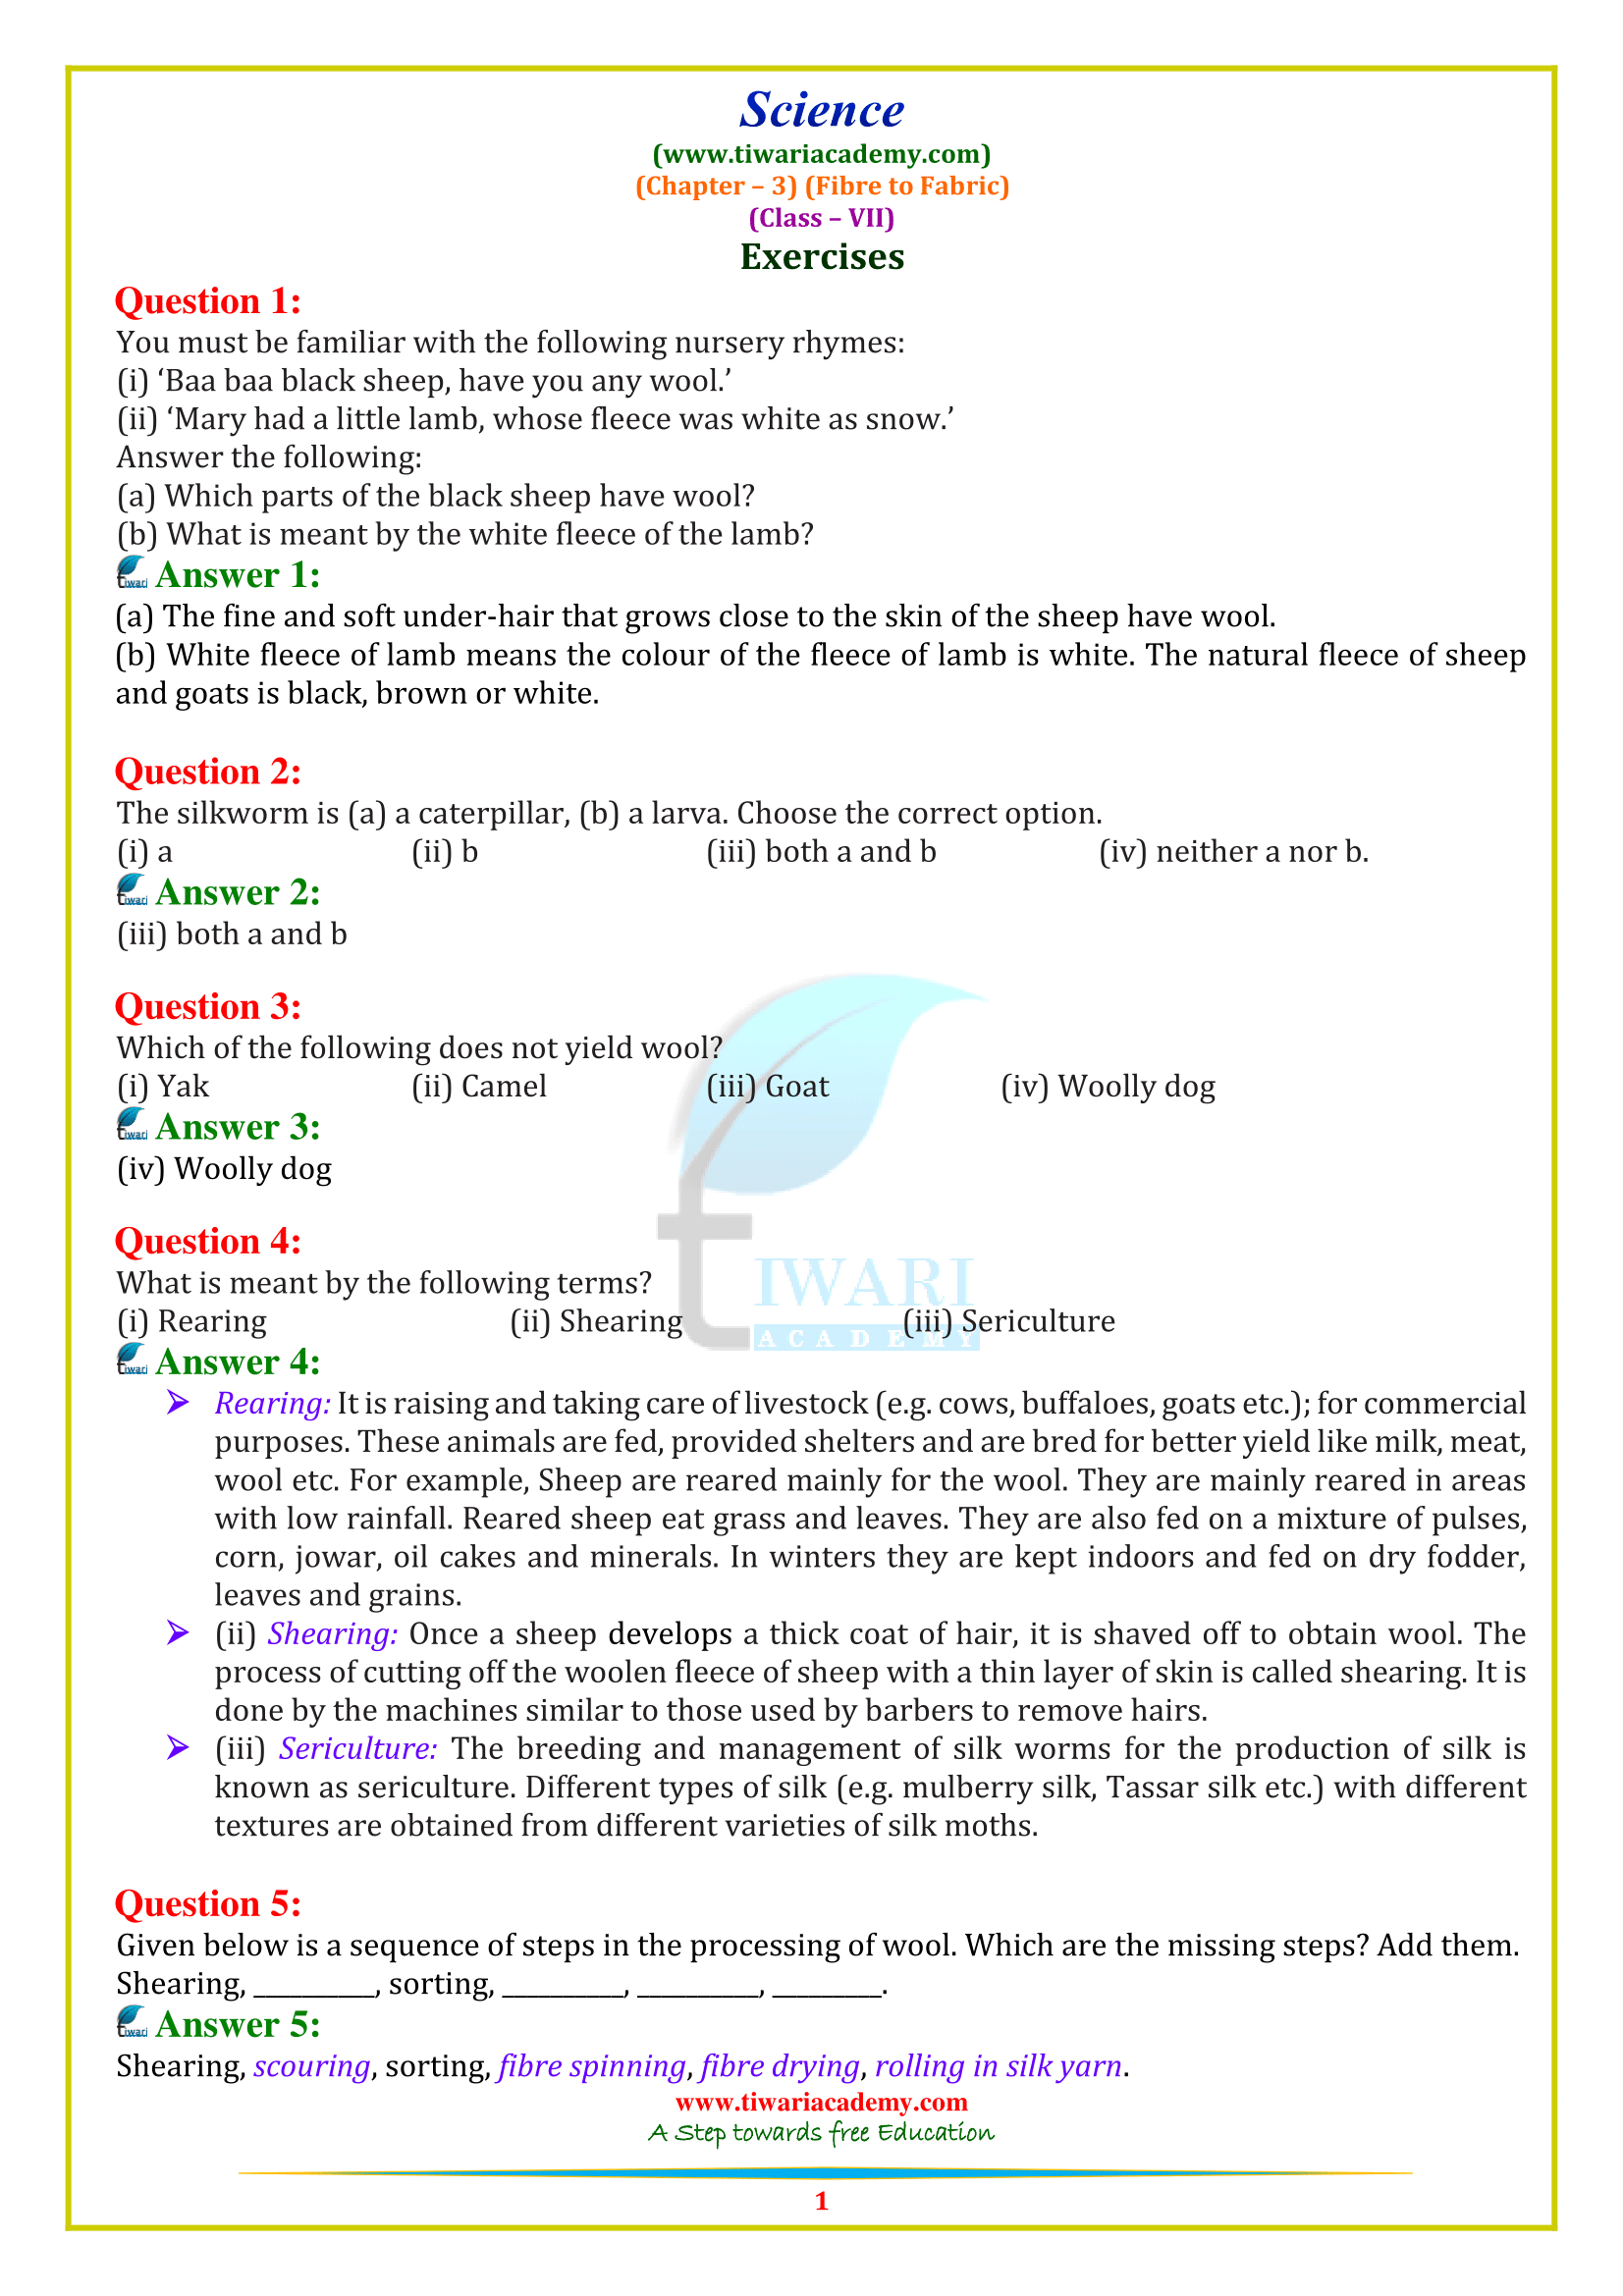 CBSE NCERT Solutions for Class 7 Science Chapter 3: Fibre to Fabric